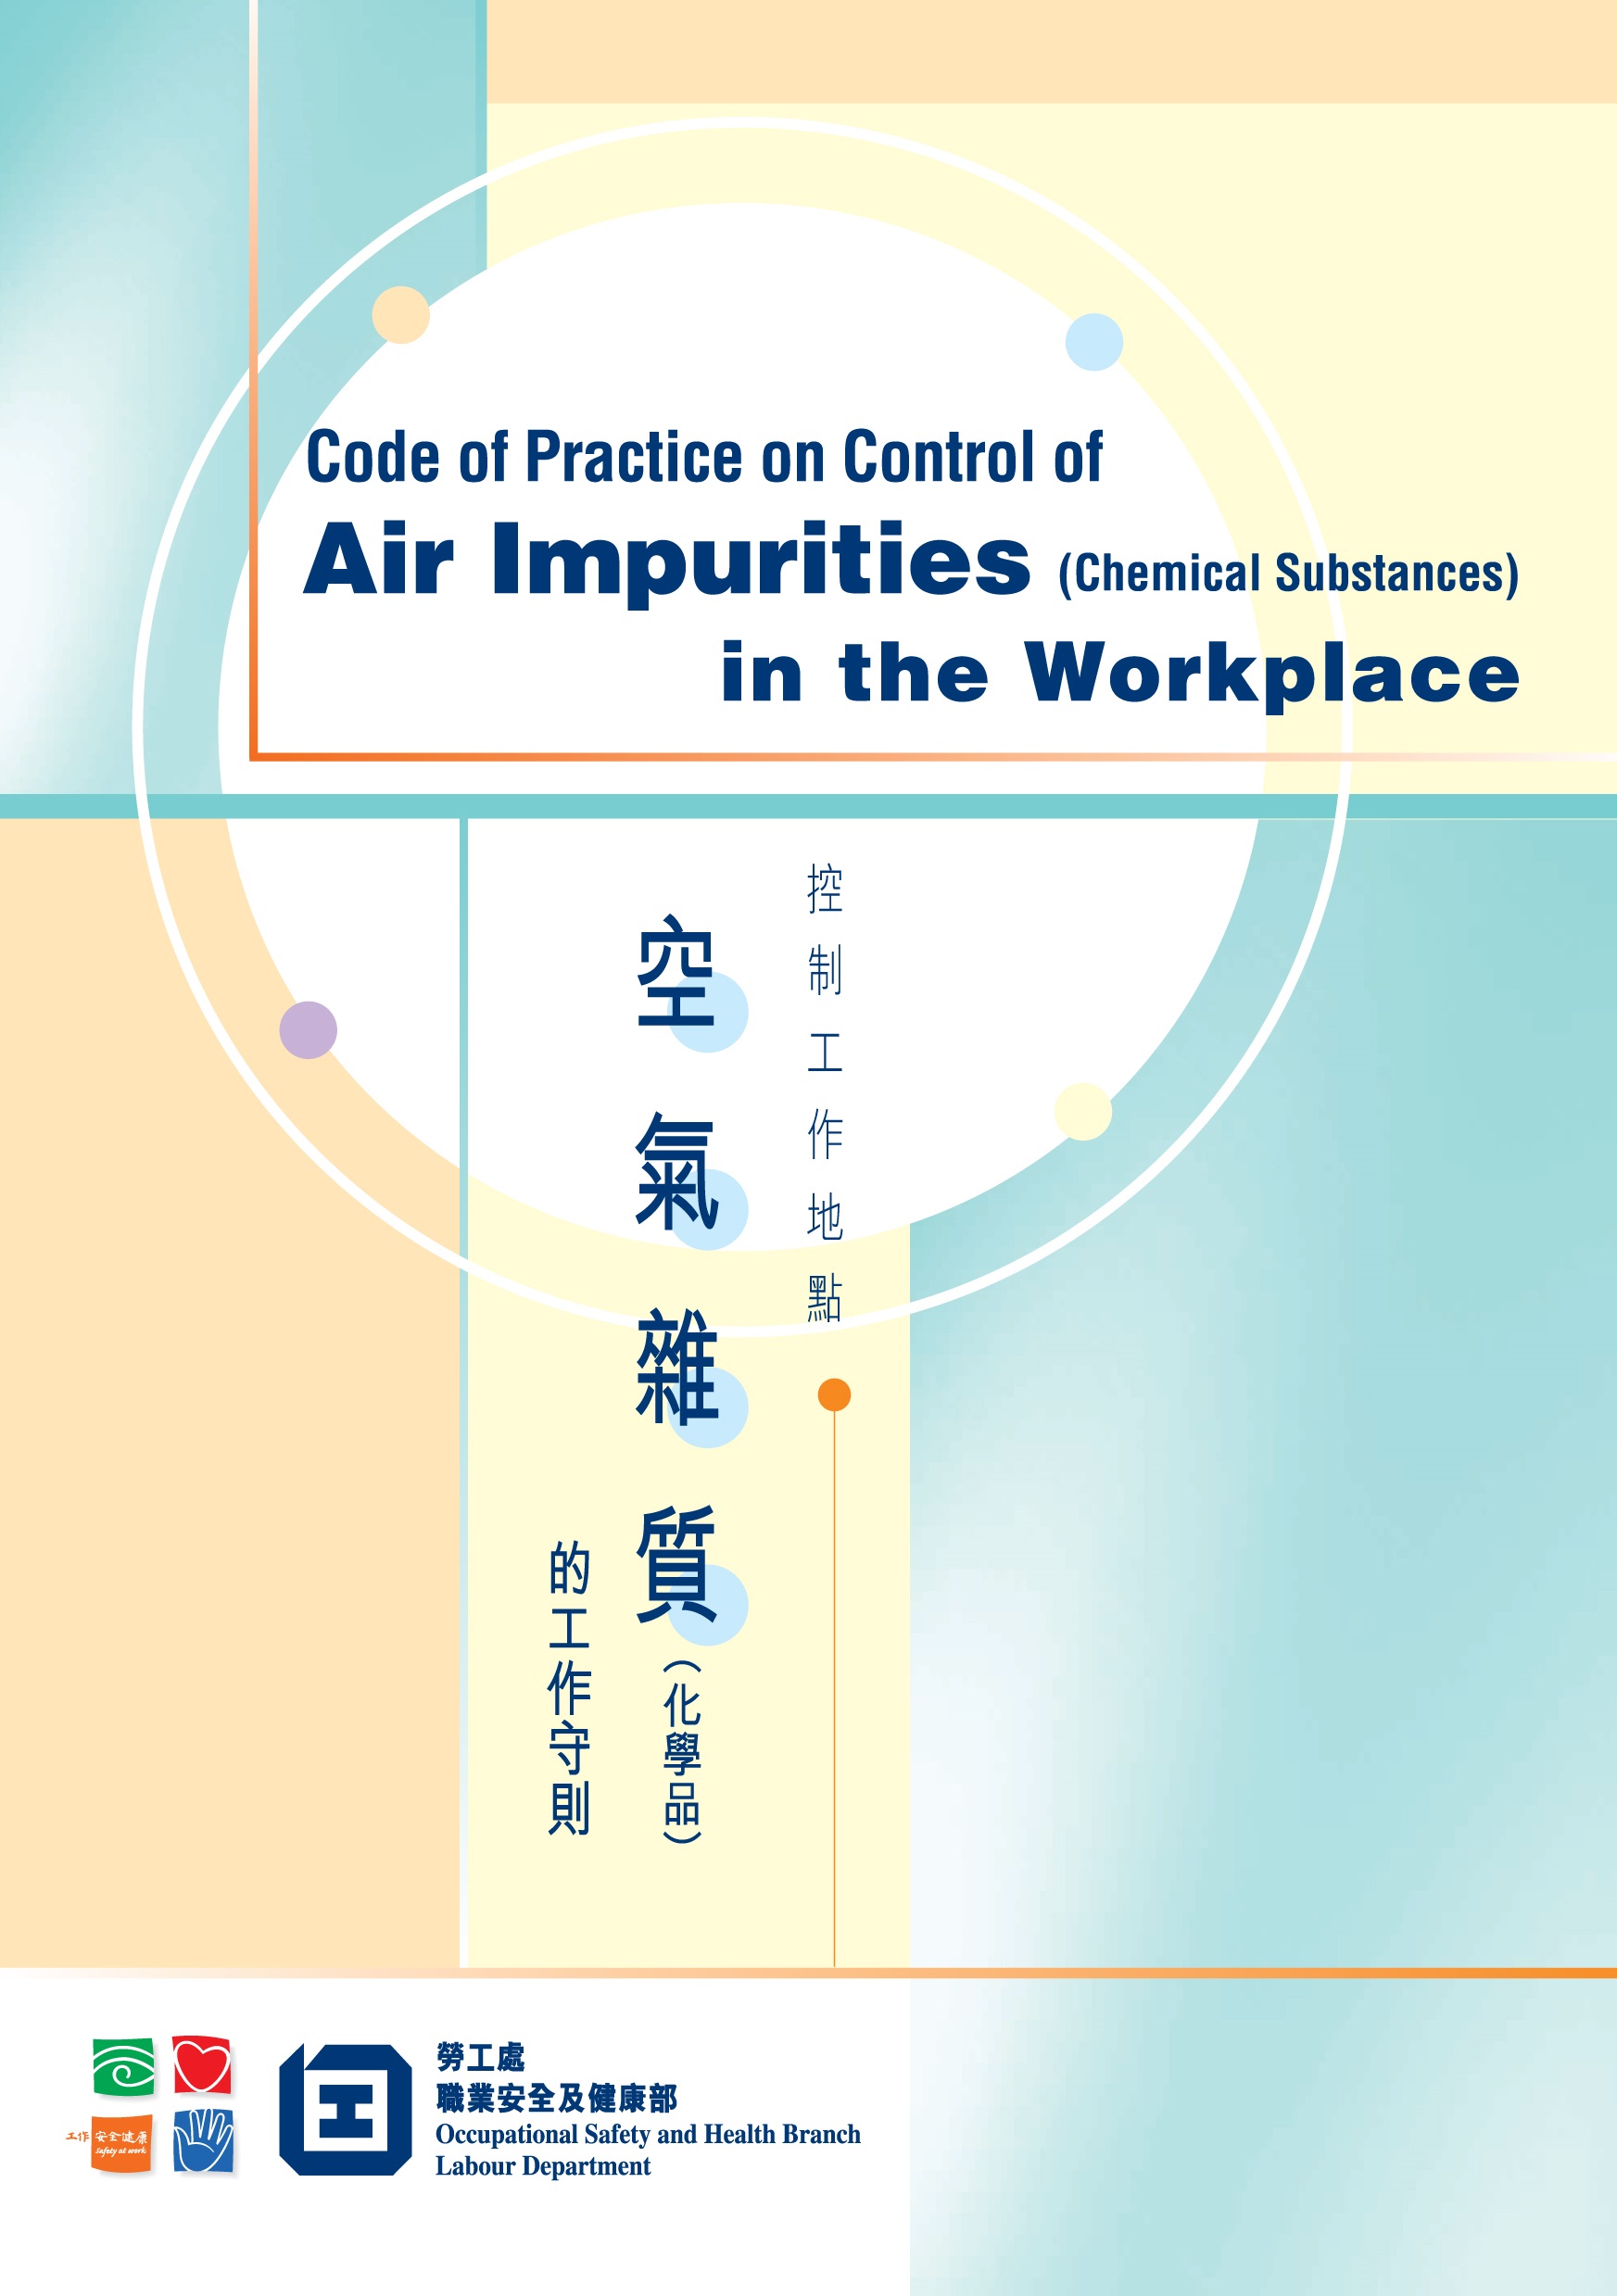 Code of Practice on Control of Air Impurities (Chemical Substances) in the Workplace